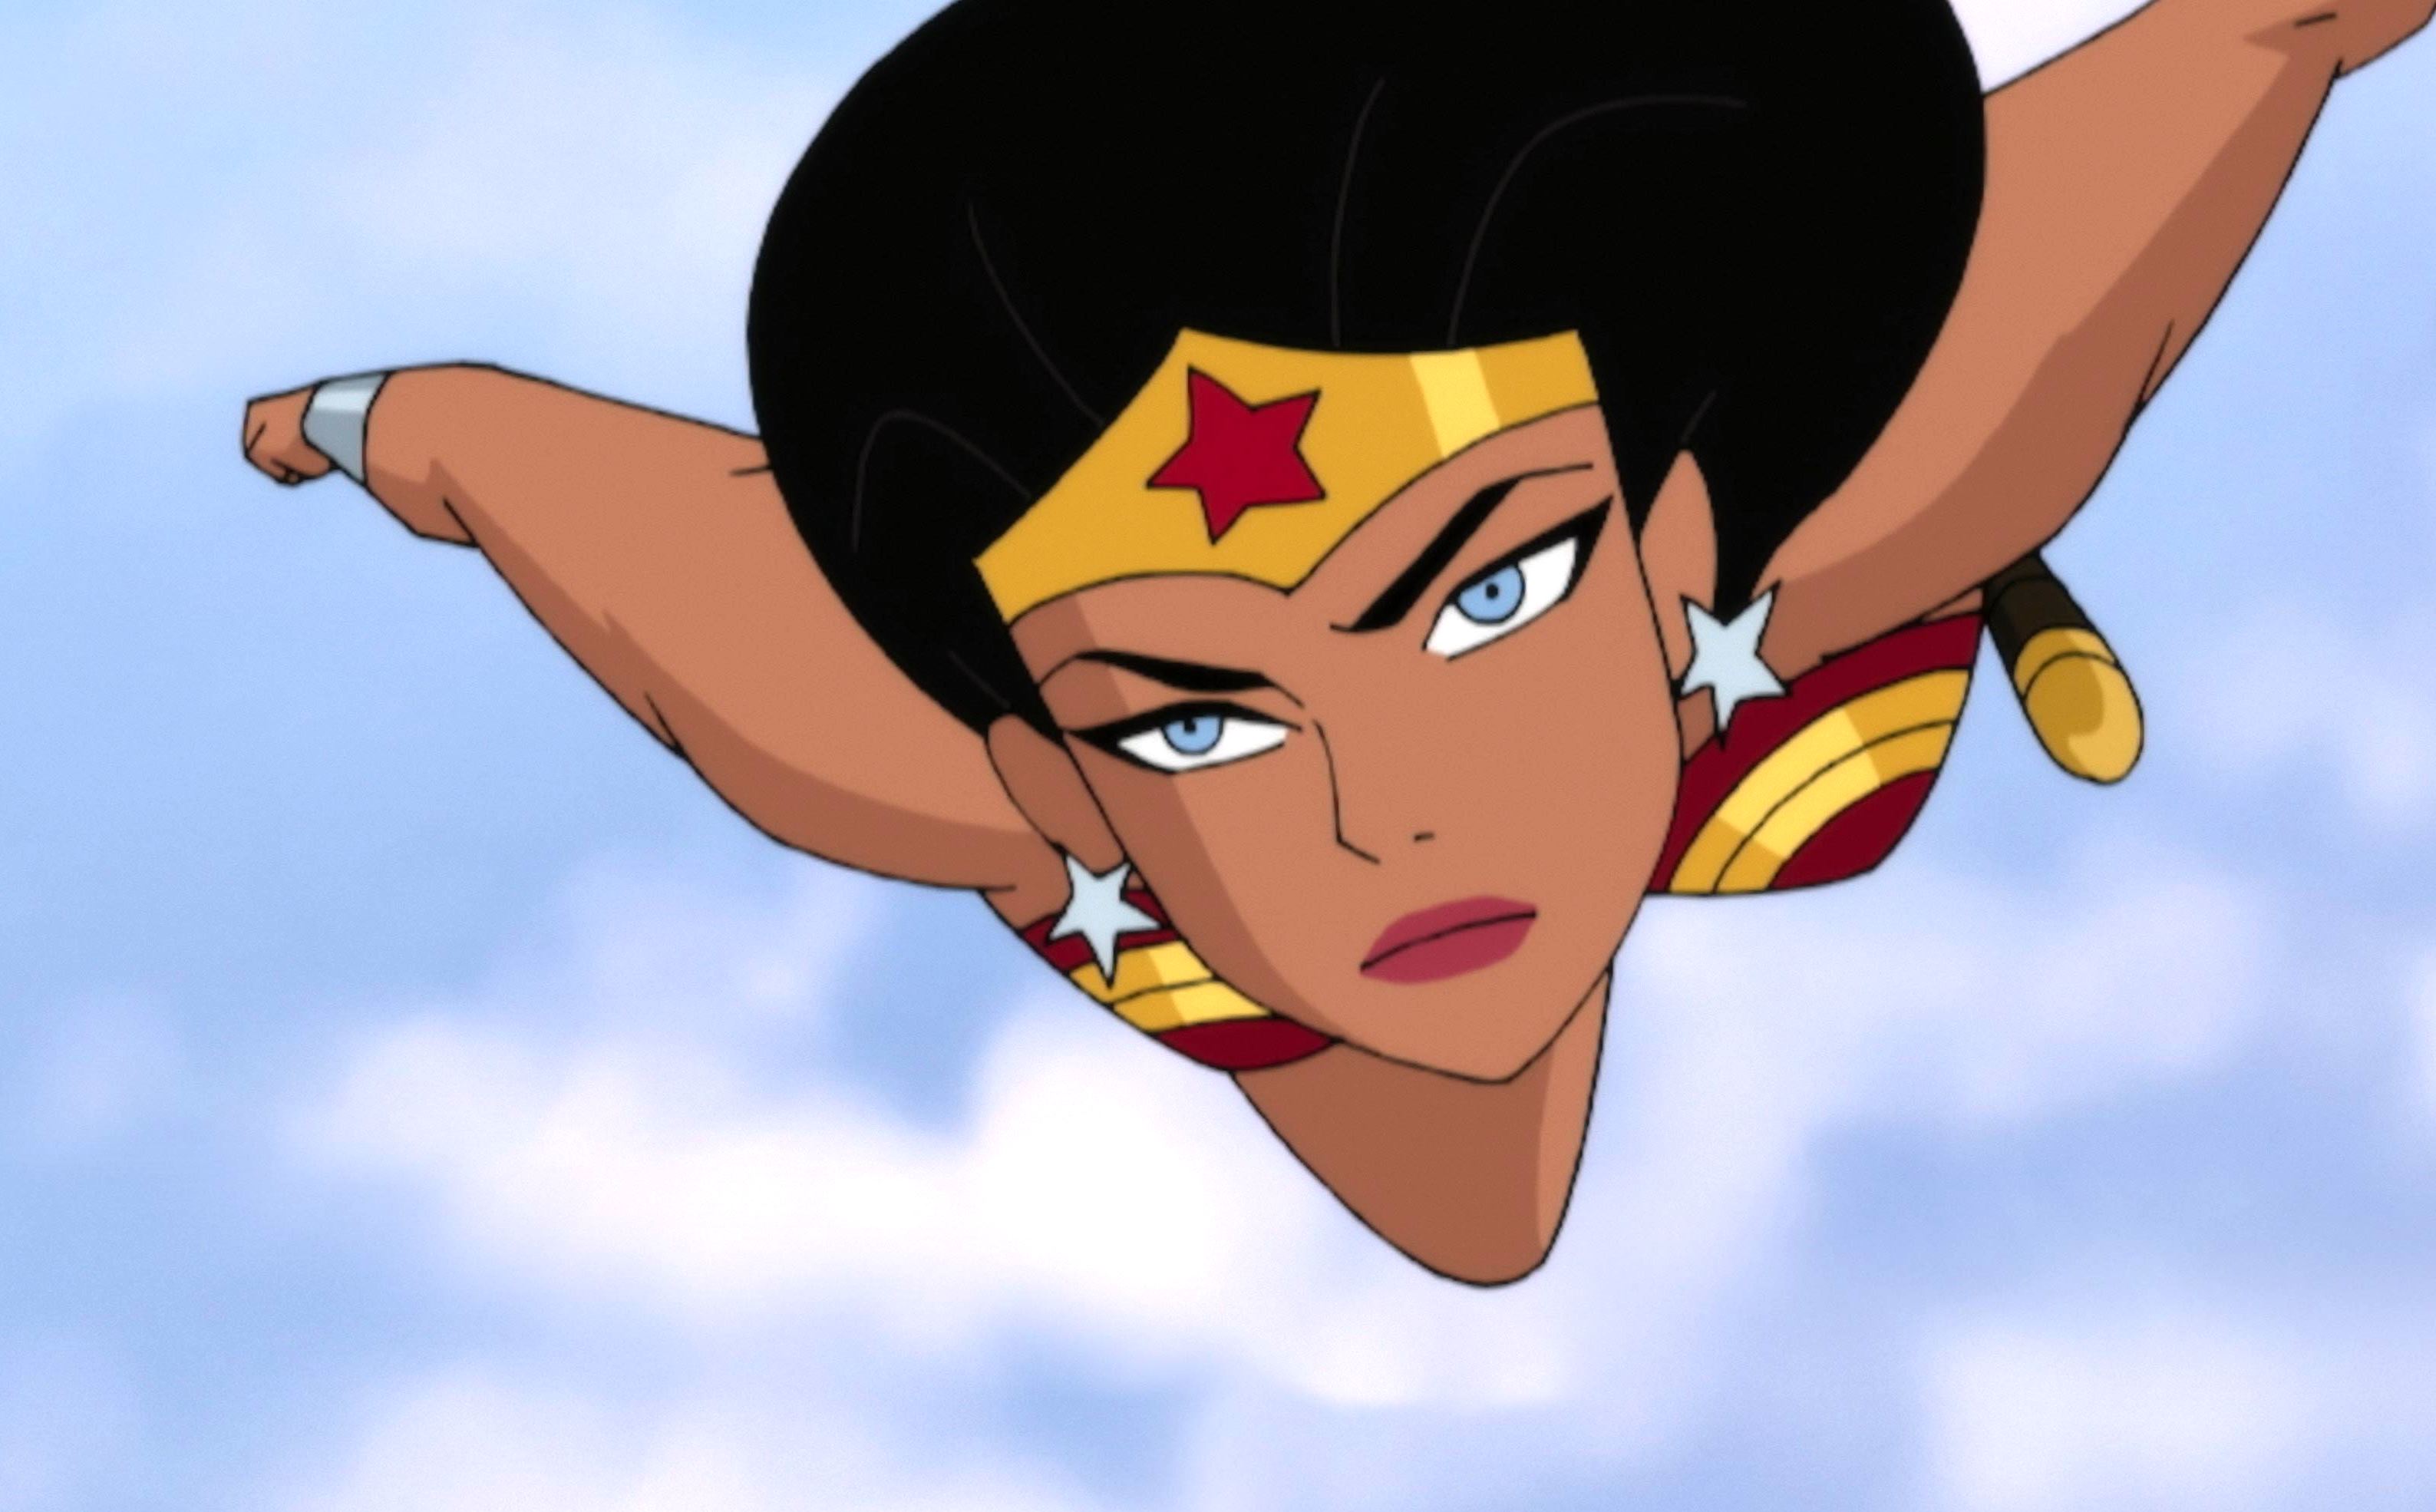 She's Fantastic: Justice League Animated WONDER WOMAN!